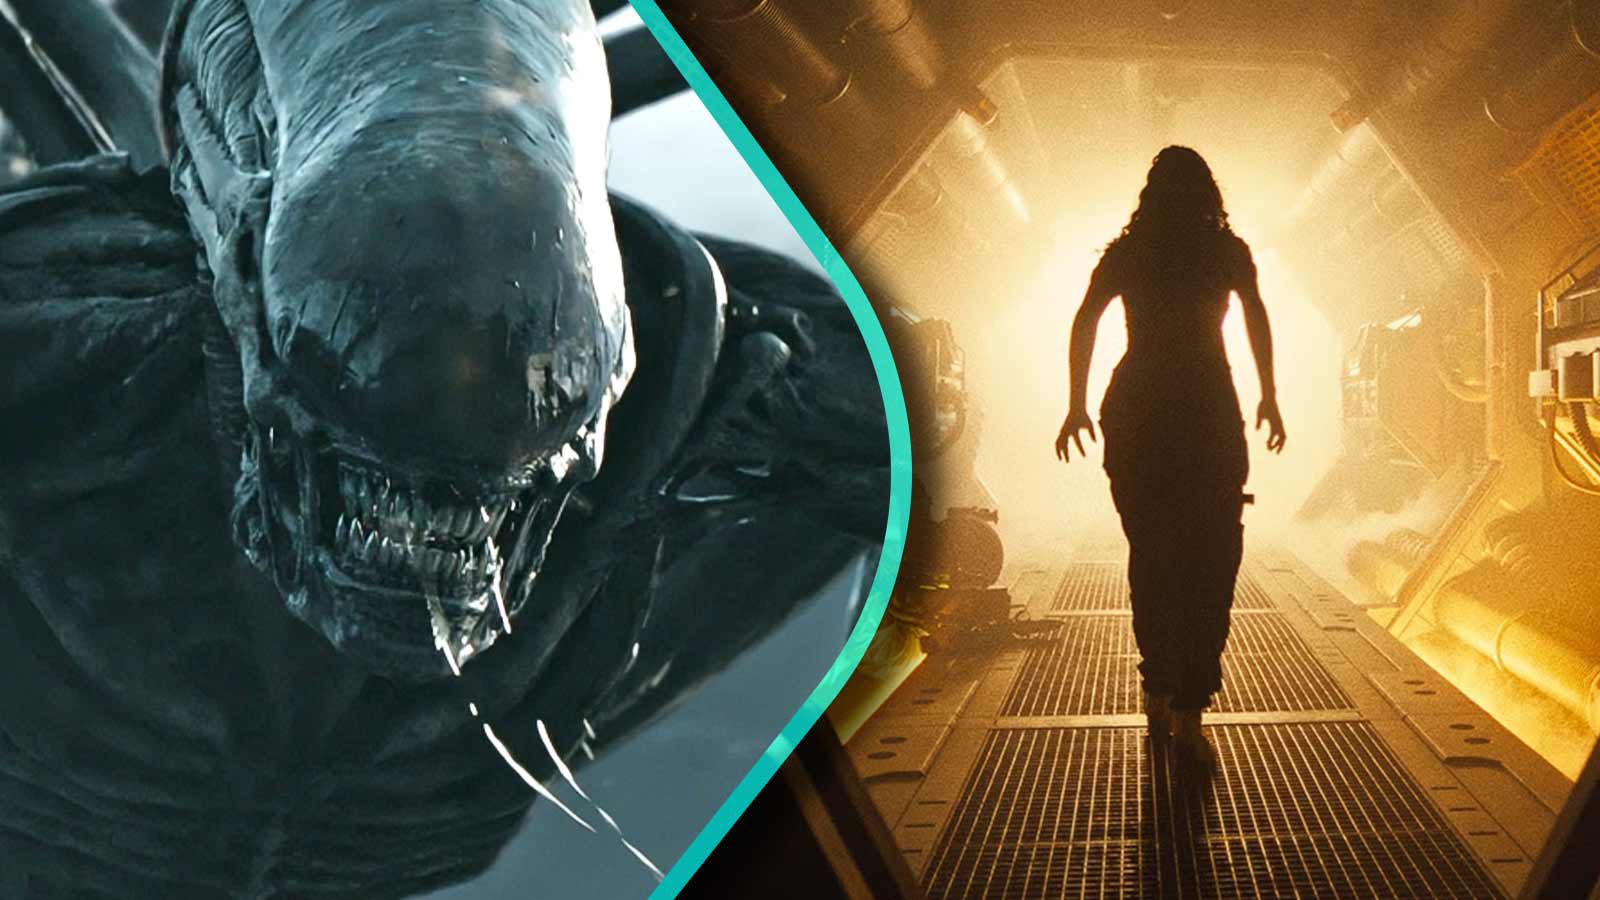 Real-life Inspiration Behind Alien: Romulus’ Most Disturbing Scene Makes it Seem Utterly Hilarious – “It is done almost like a nature documentary”